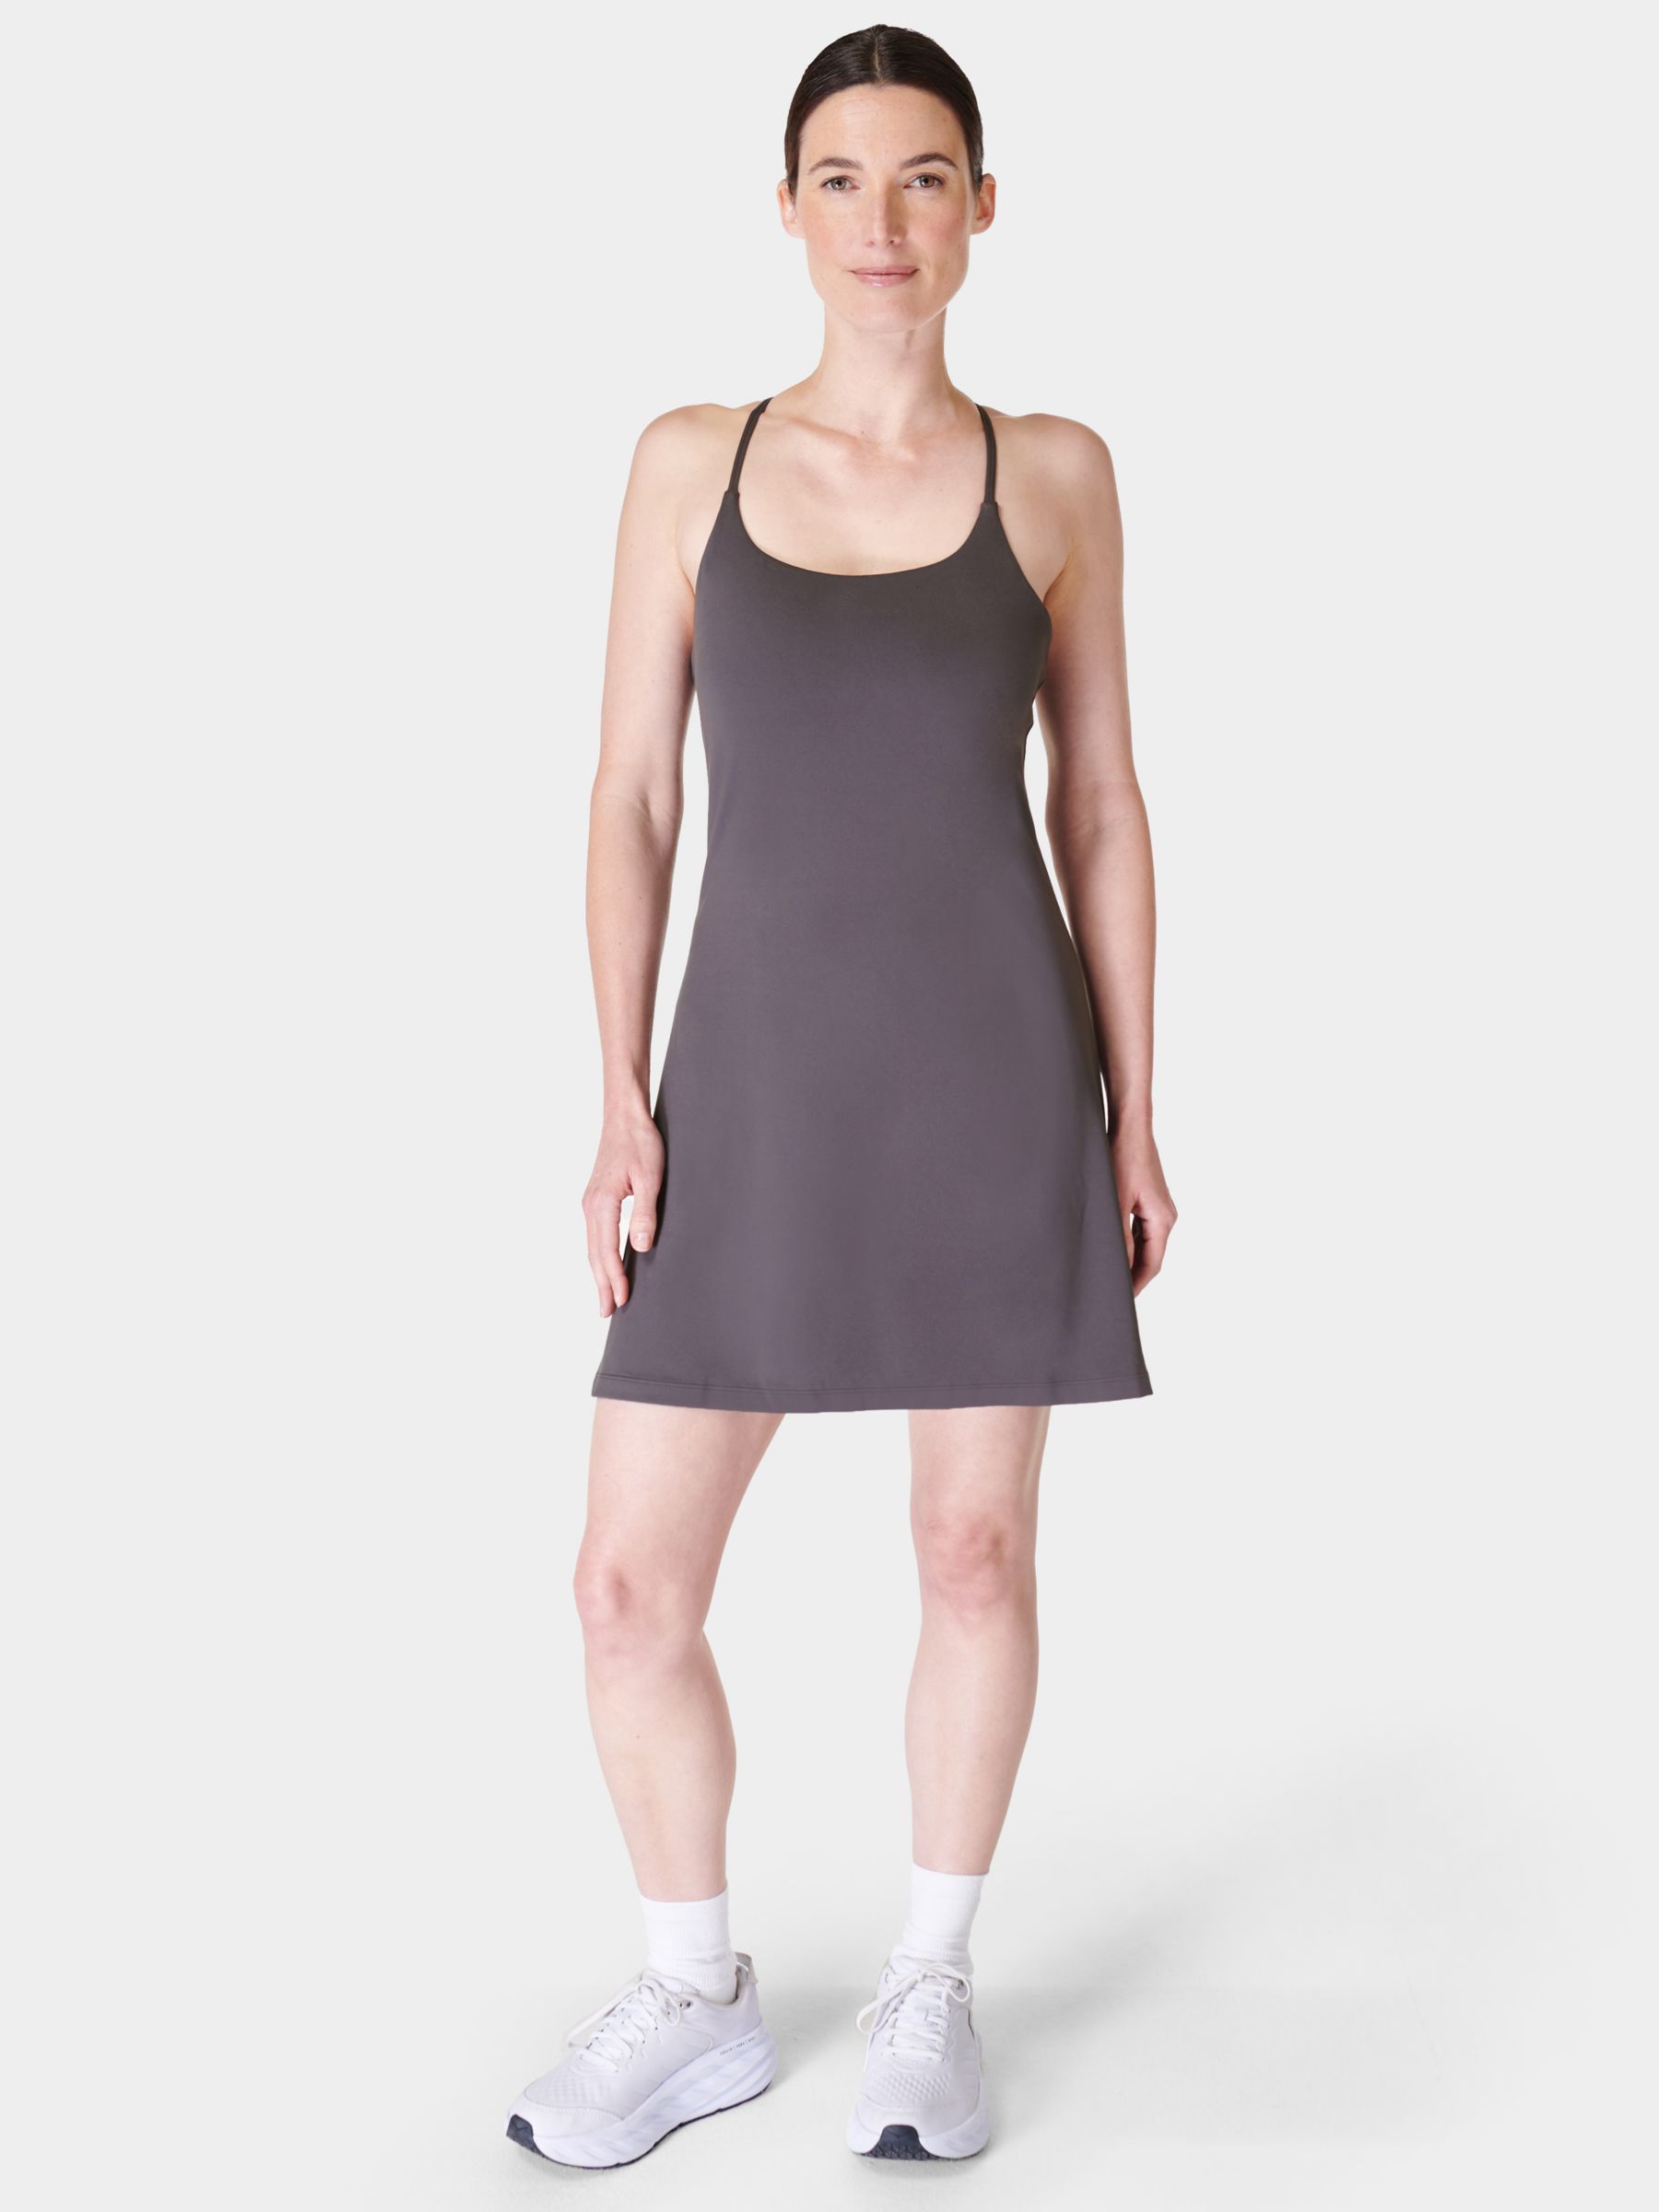 All Round Workout Dress - Agate Blue